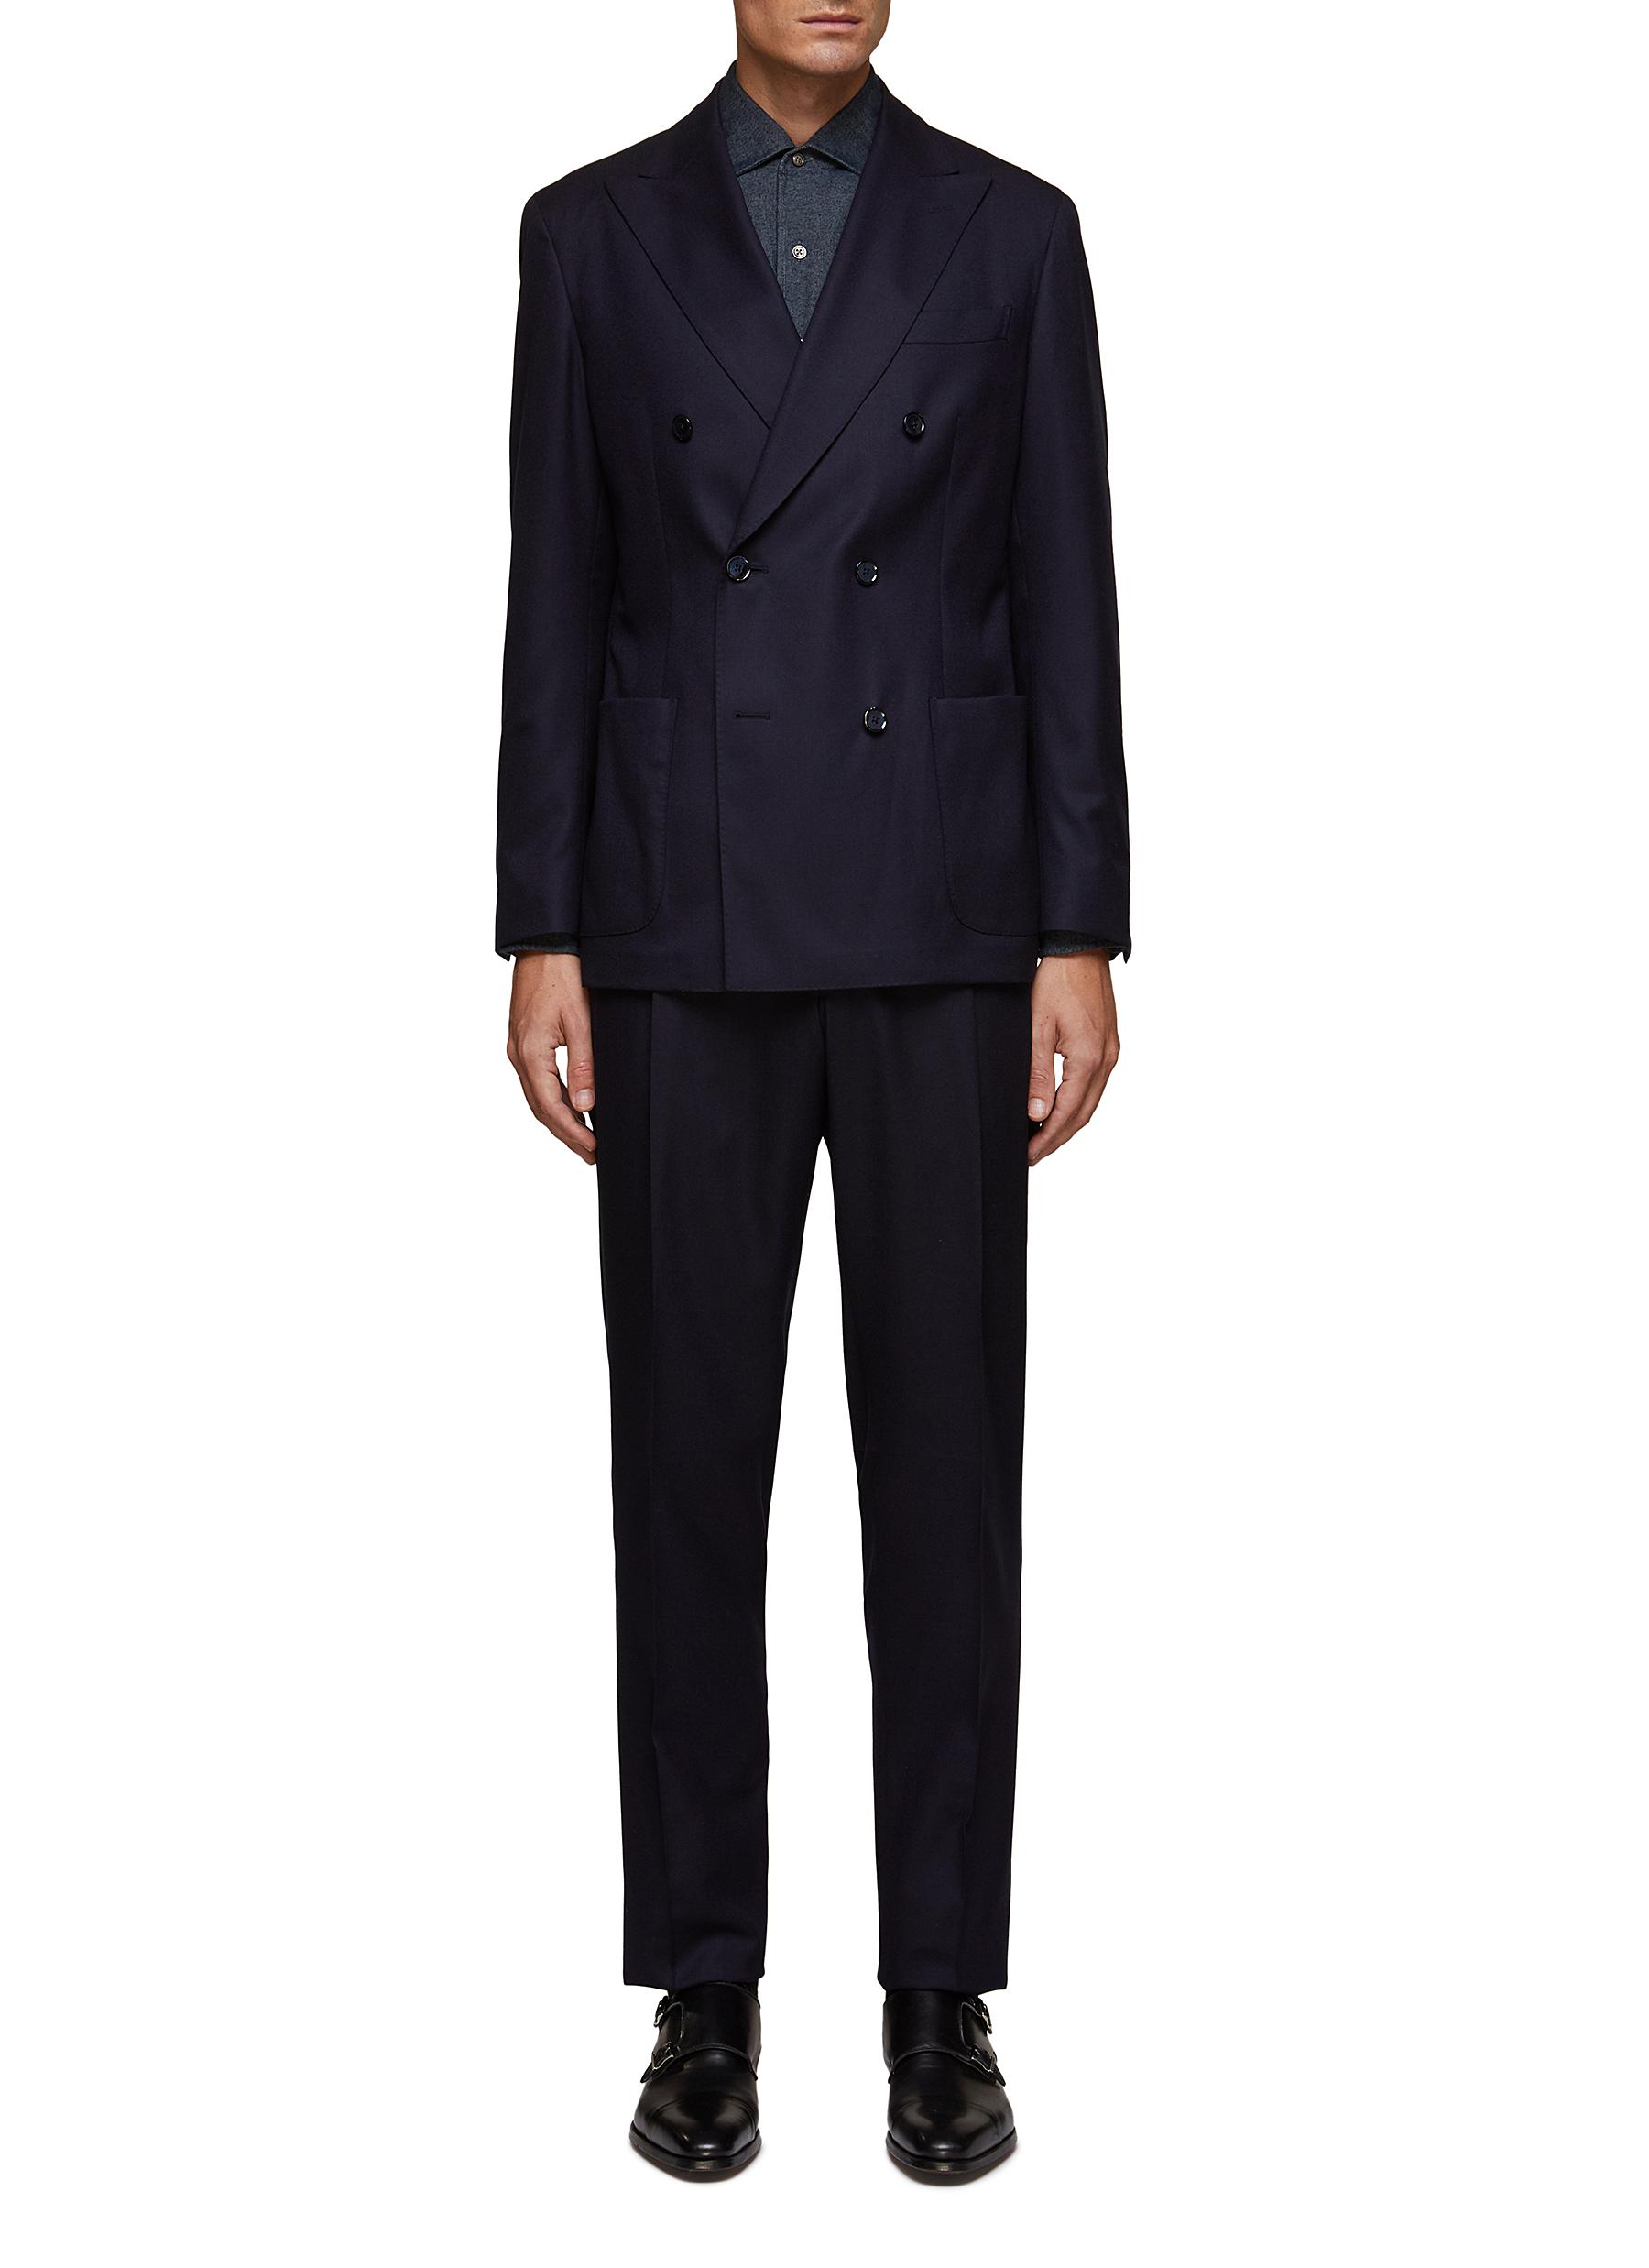 EQUIL DOUBLE BREASTED PEAK LAPEL UNLINED SUIT